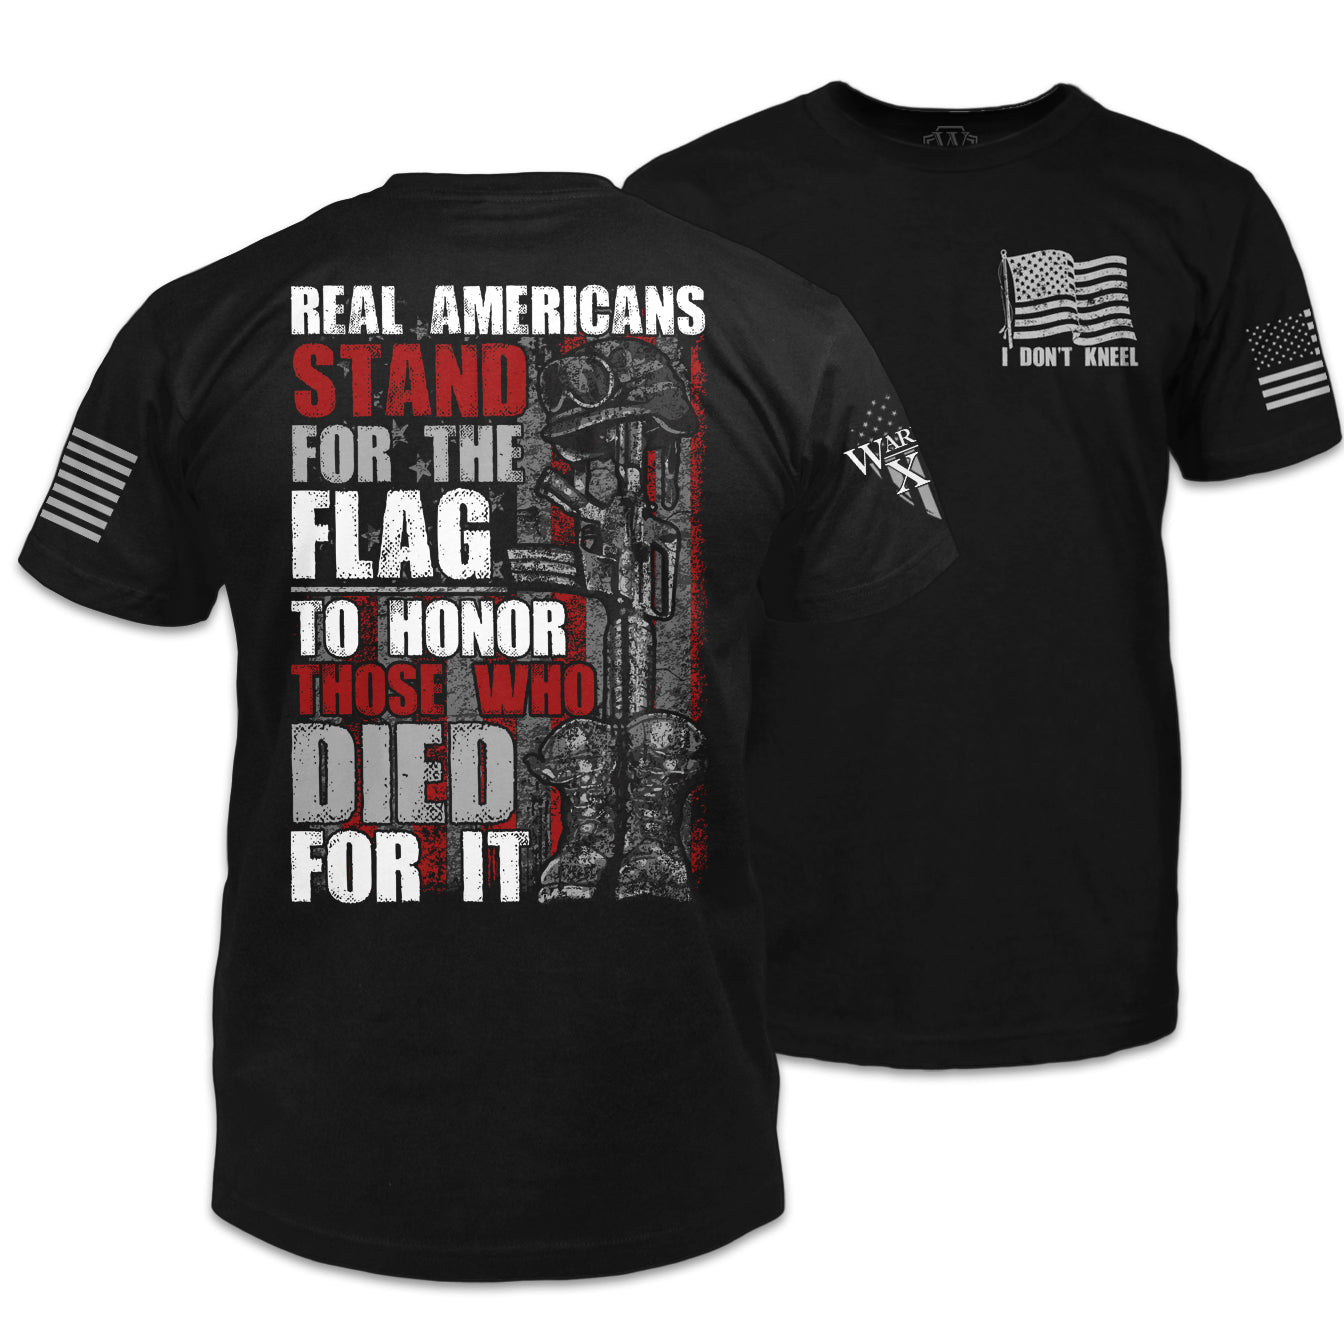 Front and back black t-shirt with the words "Real Americans Stand For The Flag To Honor Those Who Died For It!" printed on the shirt.